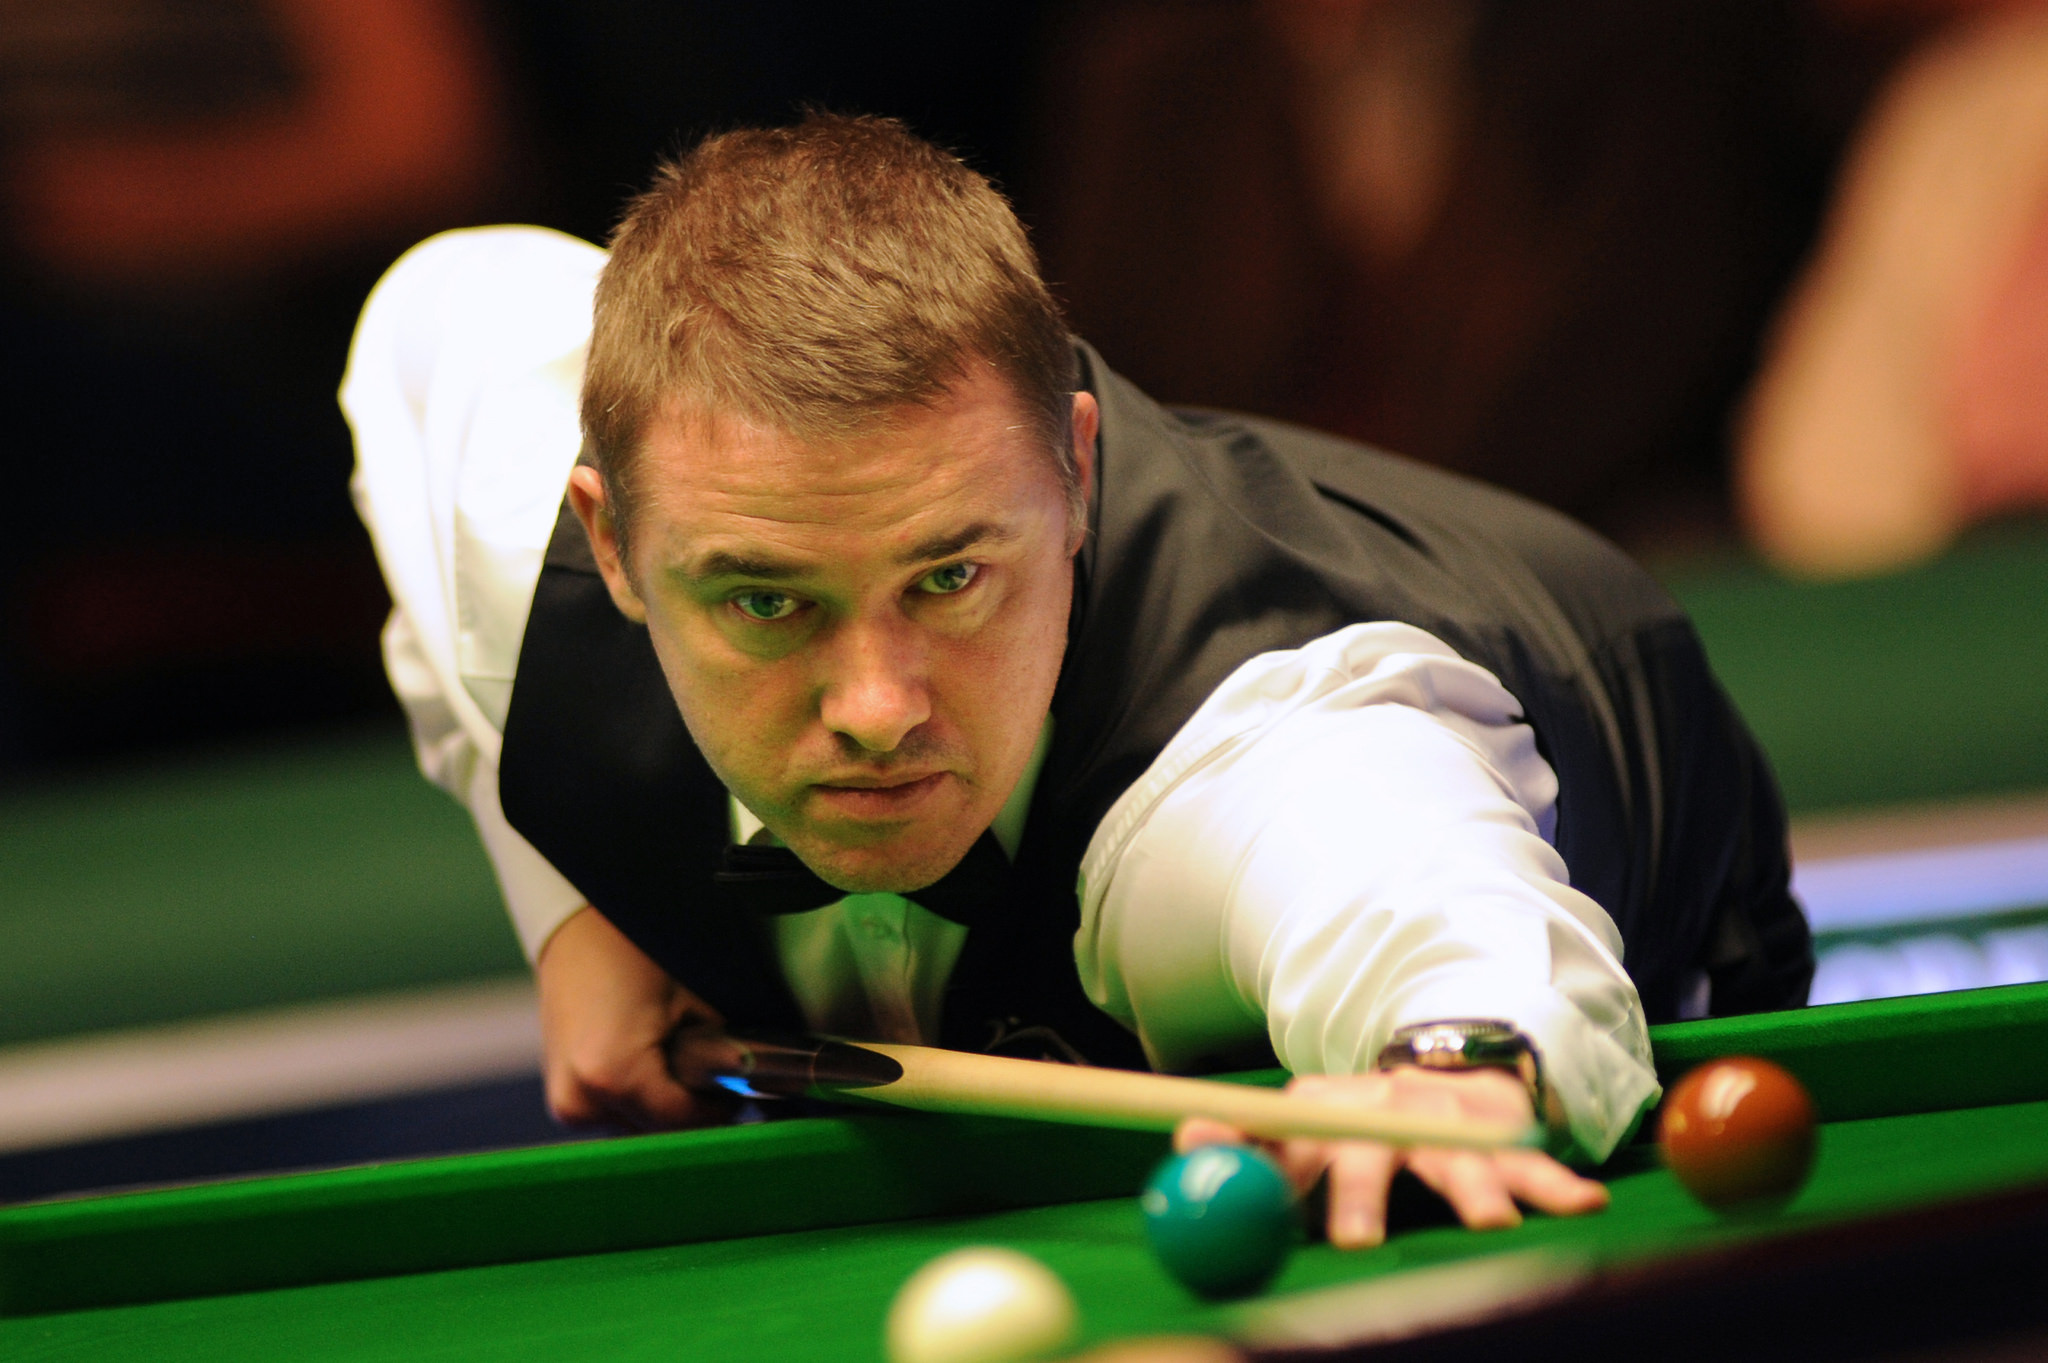 How tall is Stephen Hendry?